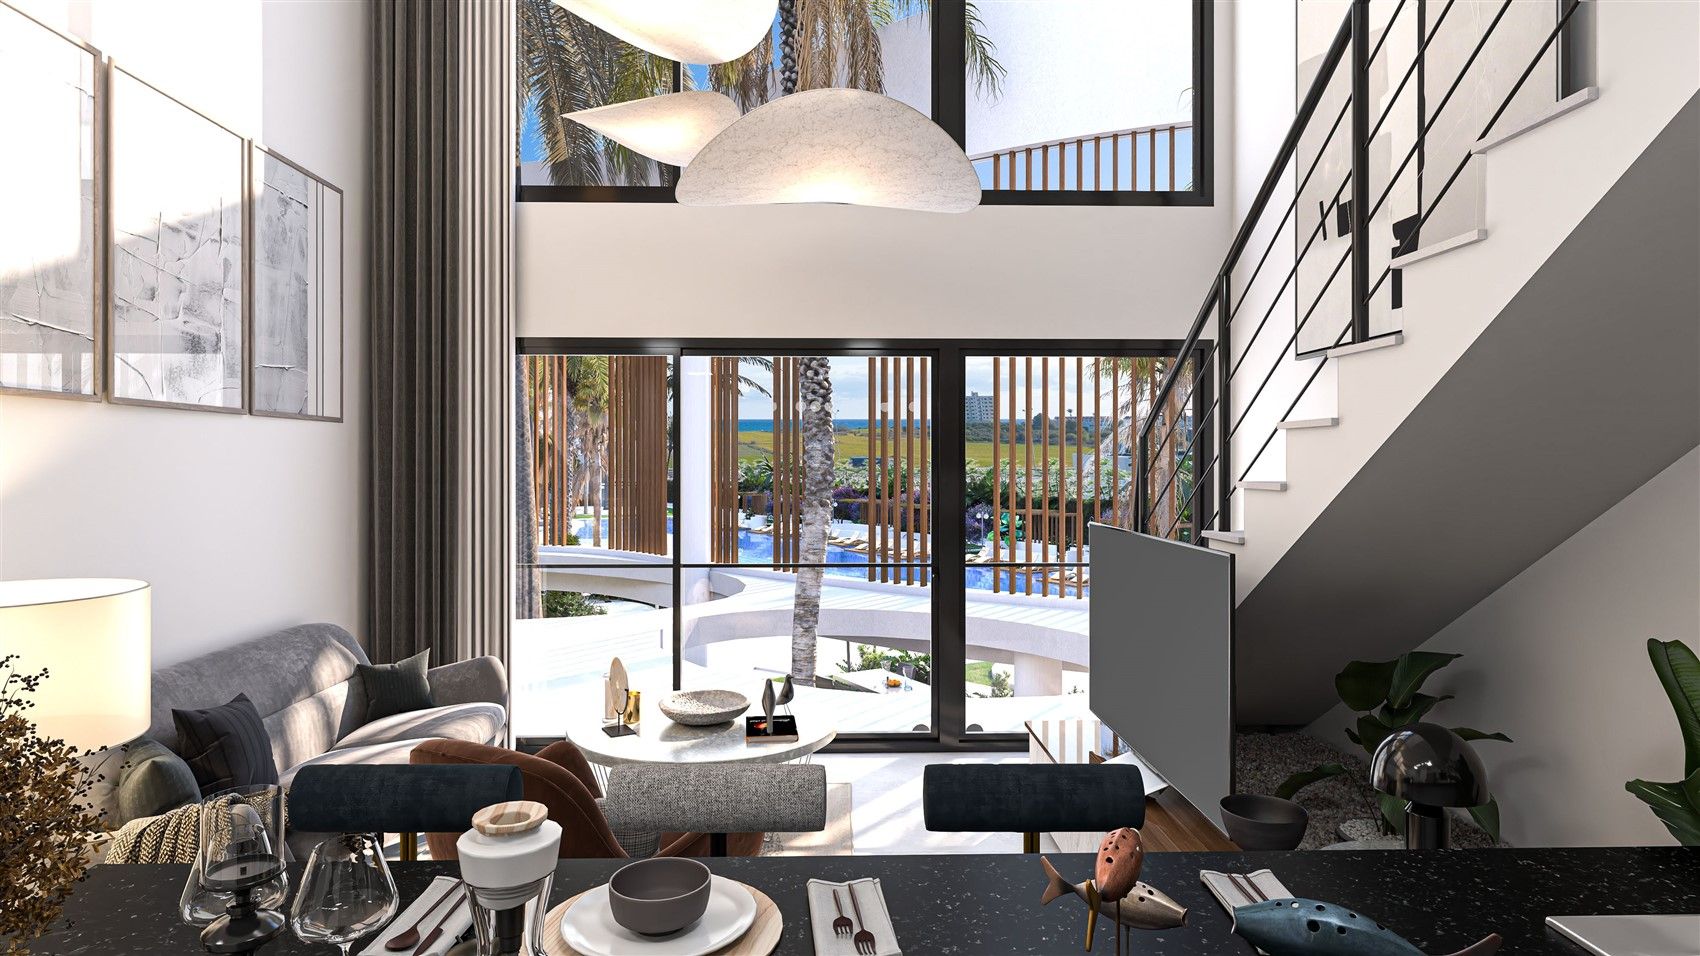 Modern residential complex in a few minutes from the sea in Northern Cyprus